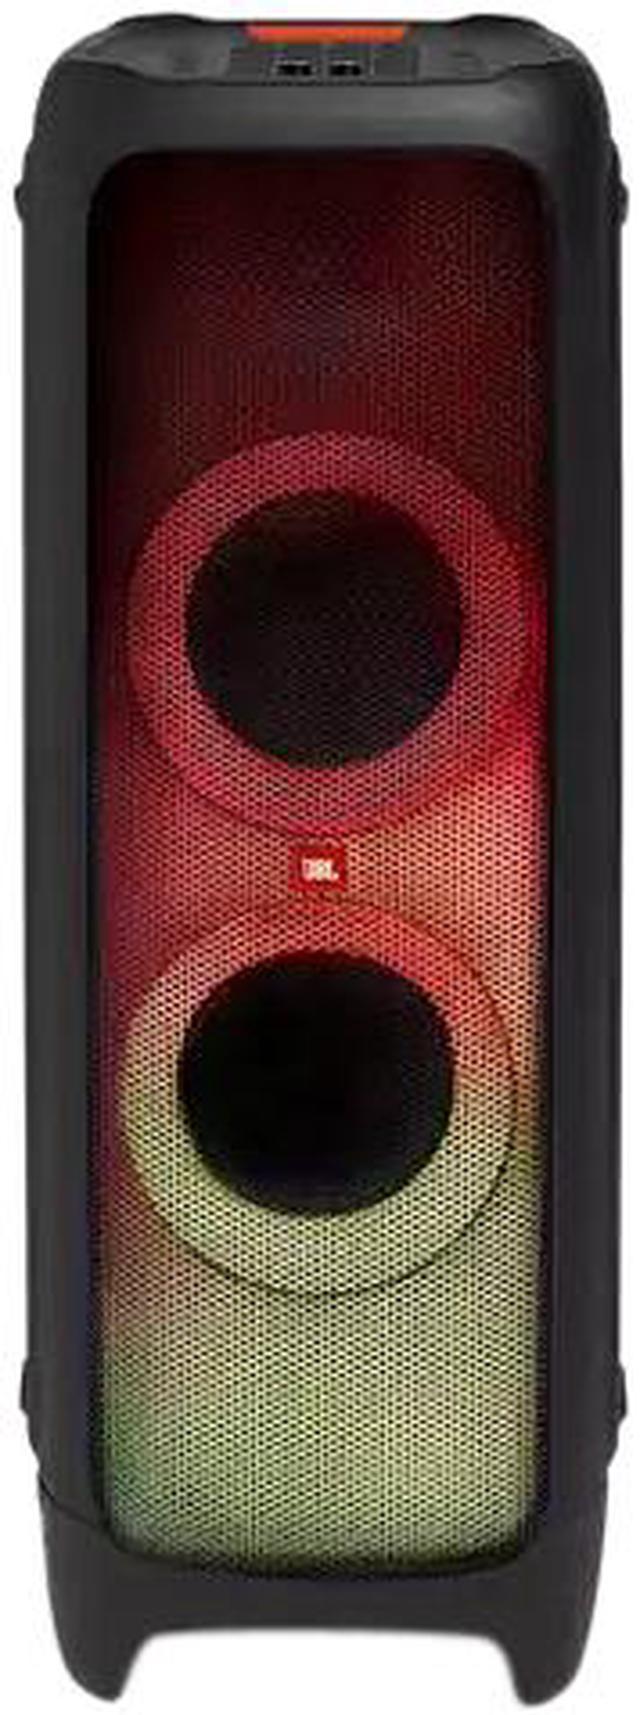 Buy JBL PartyBox 1000 with DJ Launchpad,Light Effects,Air Gesture